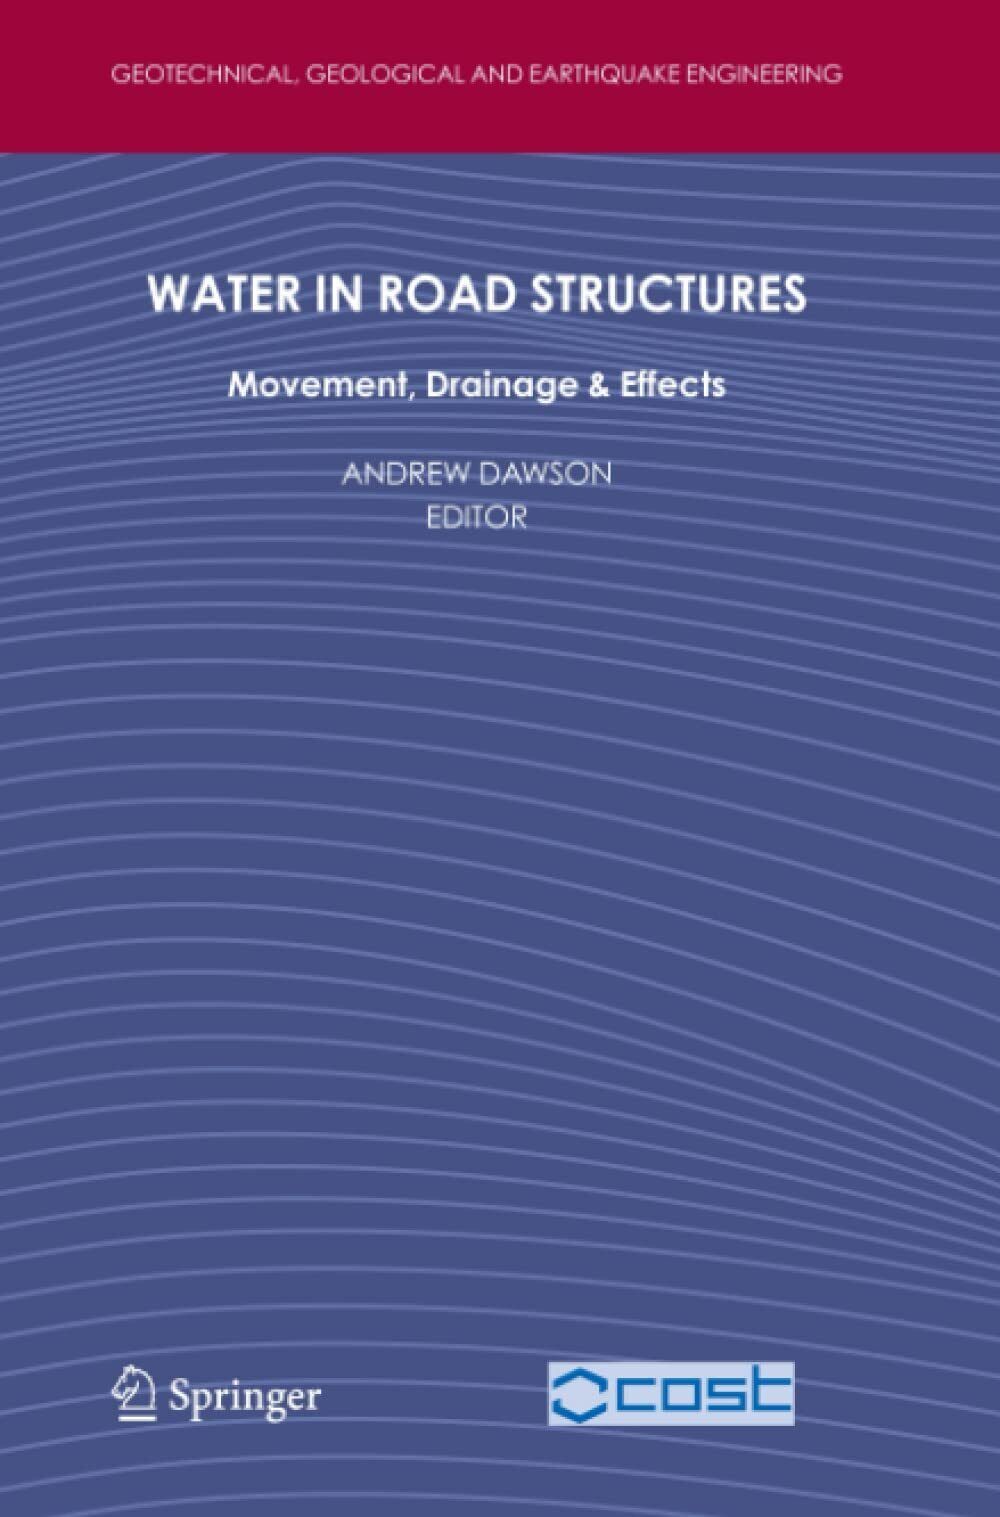 Water in Road Structures - Andrew Dawson - Springer, 2010